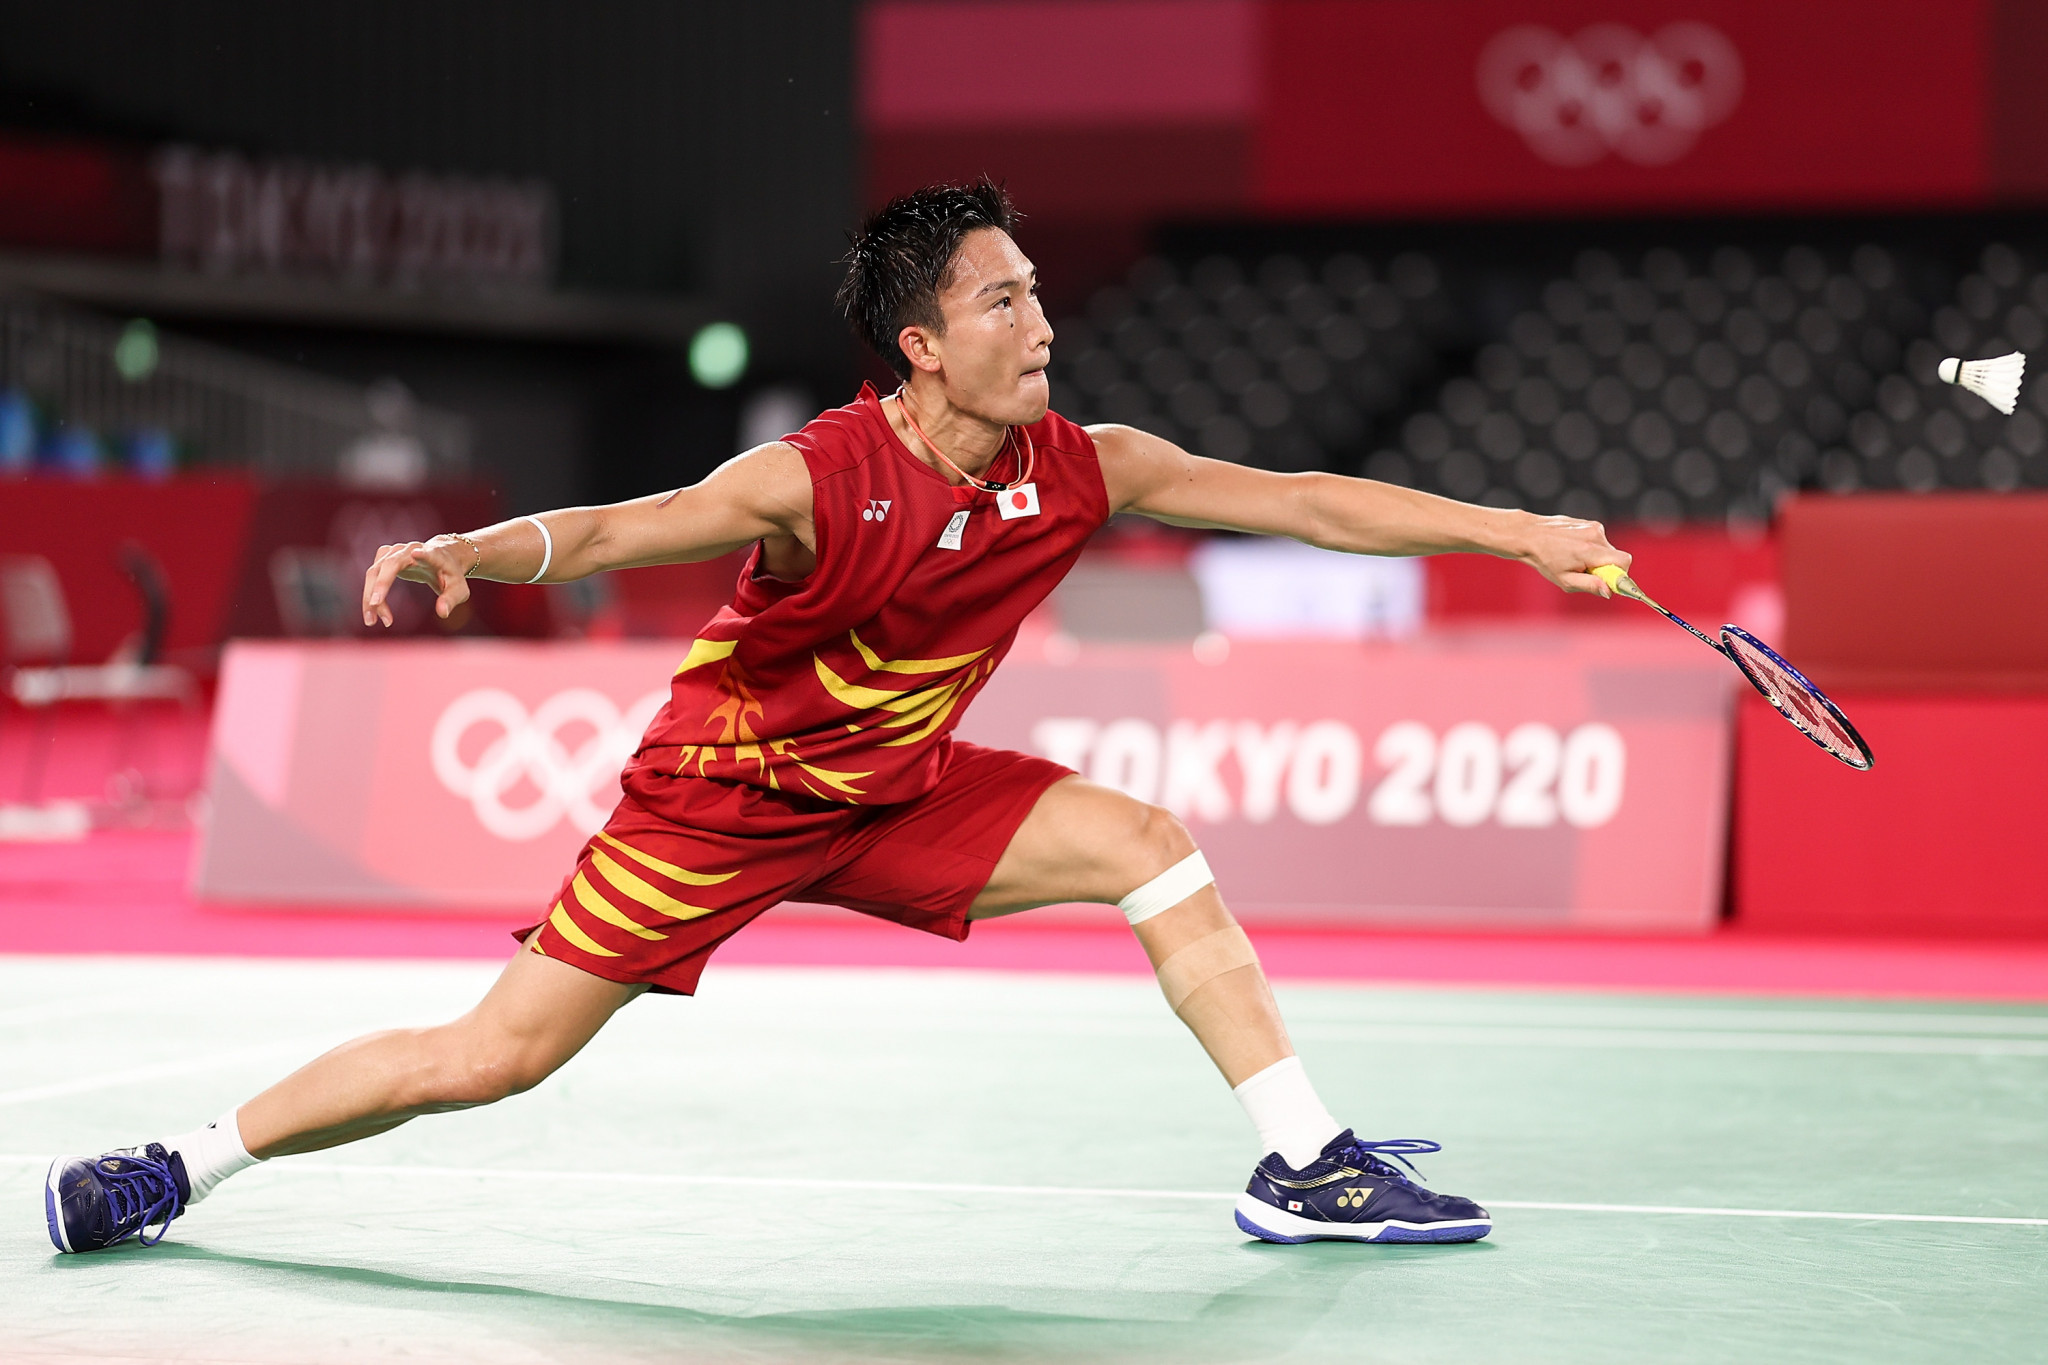 Japan's men's singles top seed Kento Momota was beaten in three games by Indonesia's Chico Aura Dwi Wardoyo in the first round of the Badminton Asia Championships ©Getty Images